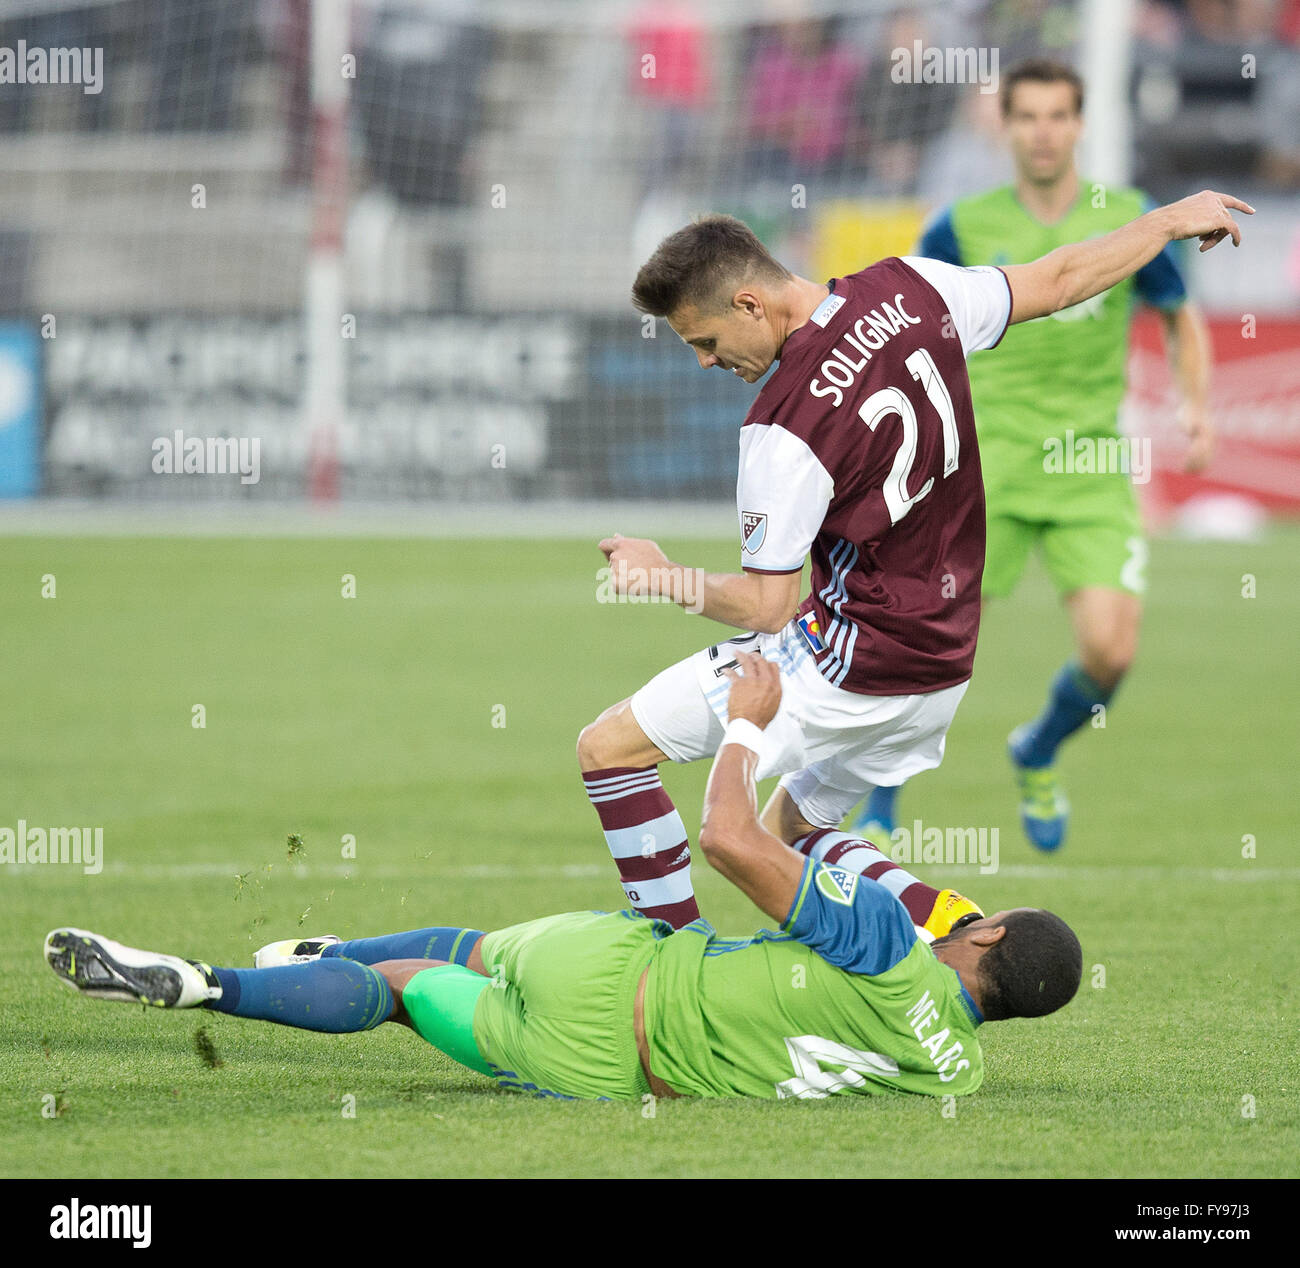 Commerce City, Colorado, USA. 23rd Apr, 2016. Rapids F LUIS SOLIGNAC, top center, gets pulled down by Sounders D TYEONE MEARS, bottom, during the 1st. Half at Dicks Sporting Goods Park Saturday evening. The Rapids beat the Sounders 3-1. Credit:  Hector Acevedo/ZUMA Wire/Alamy Live News Stock Photo